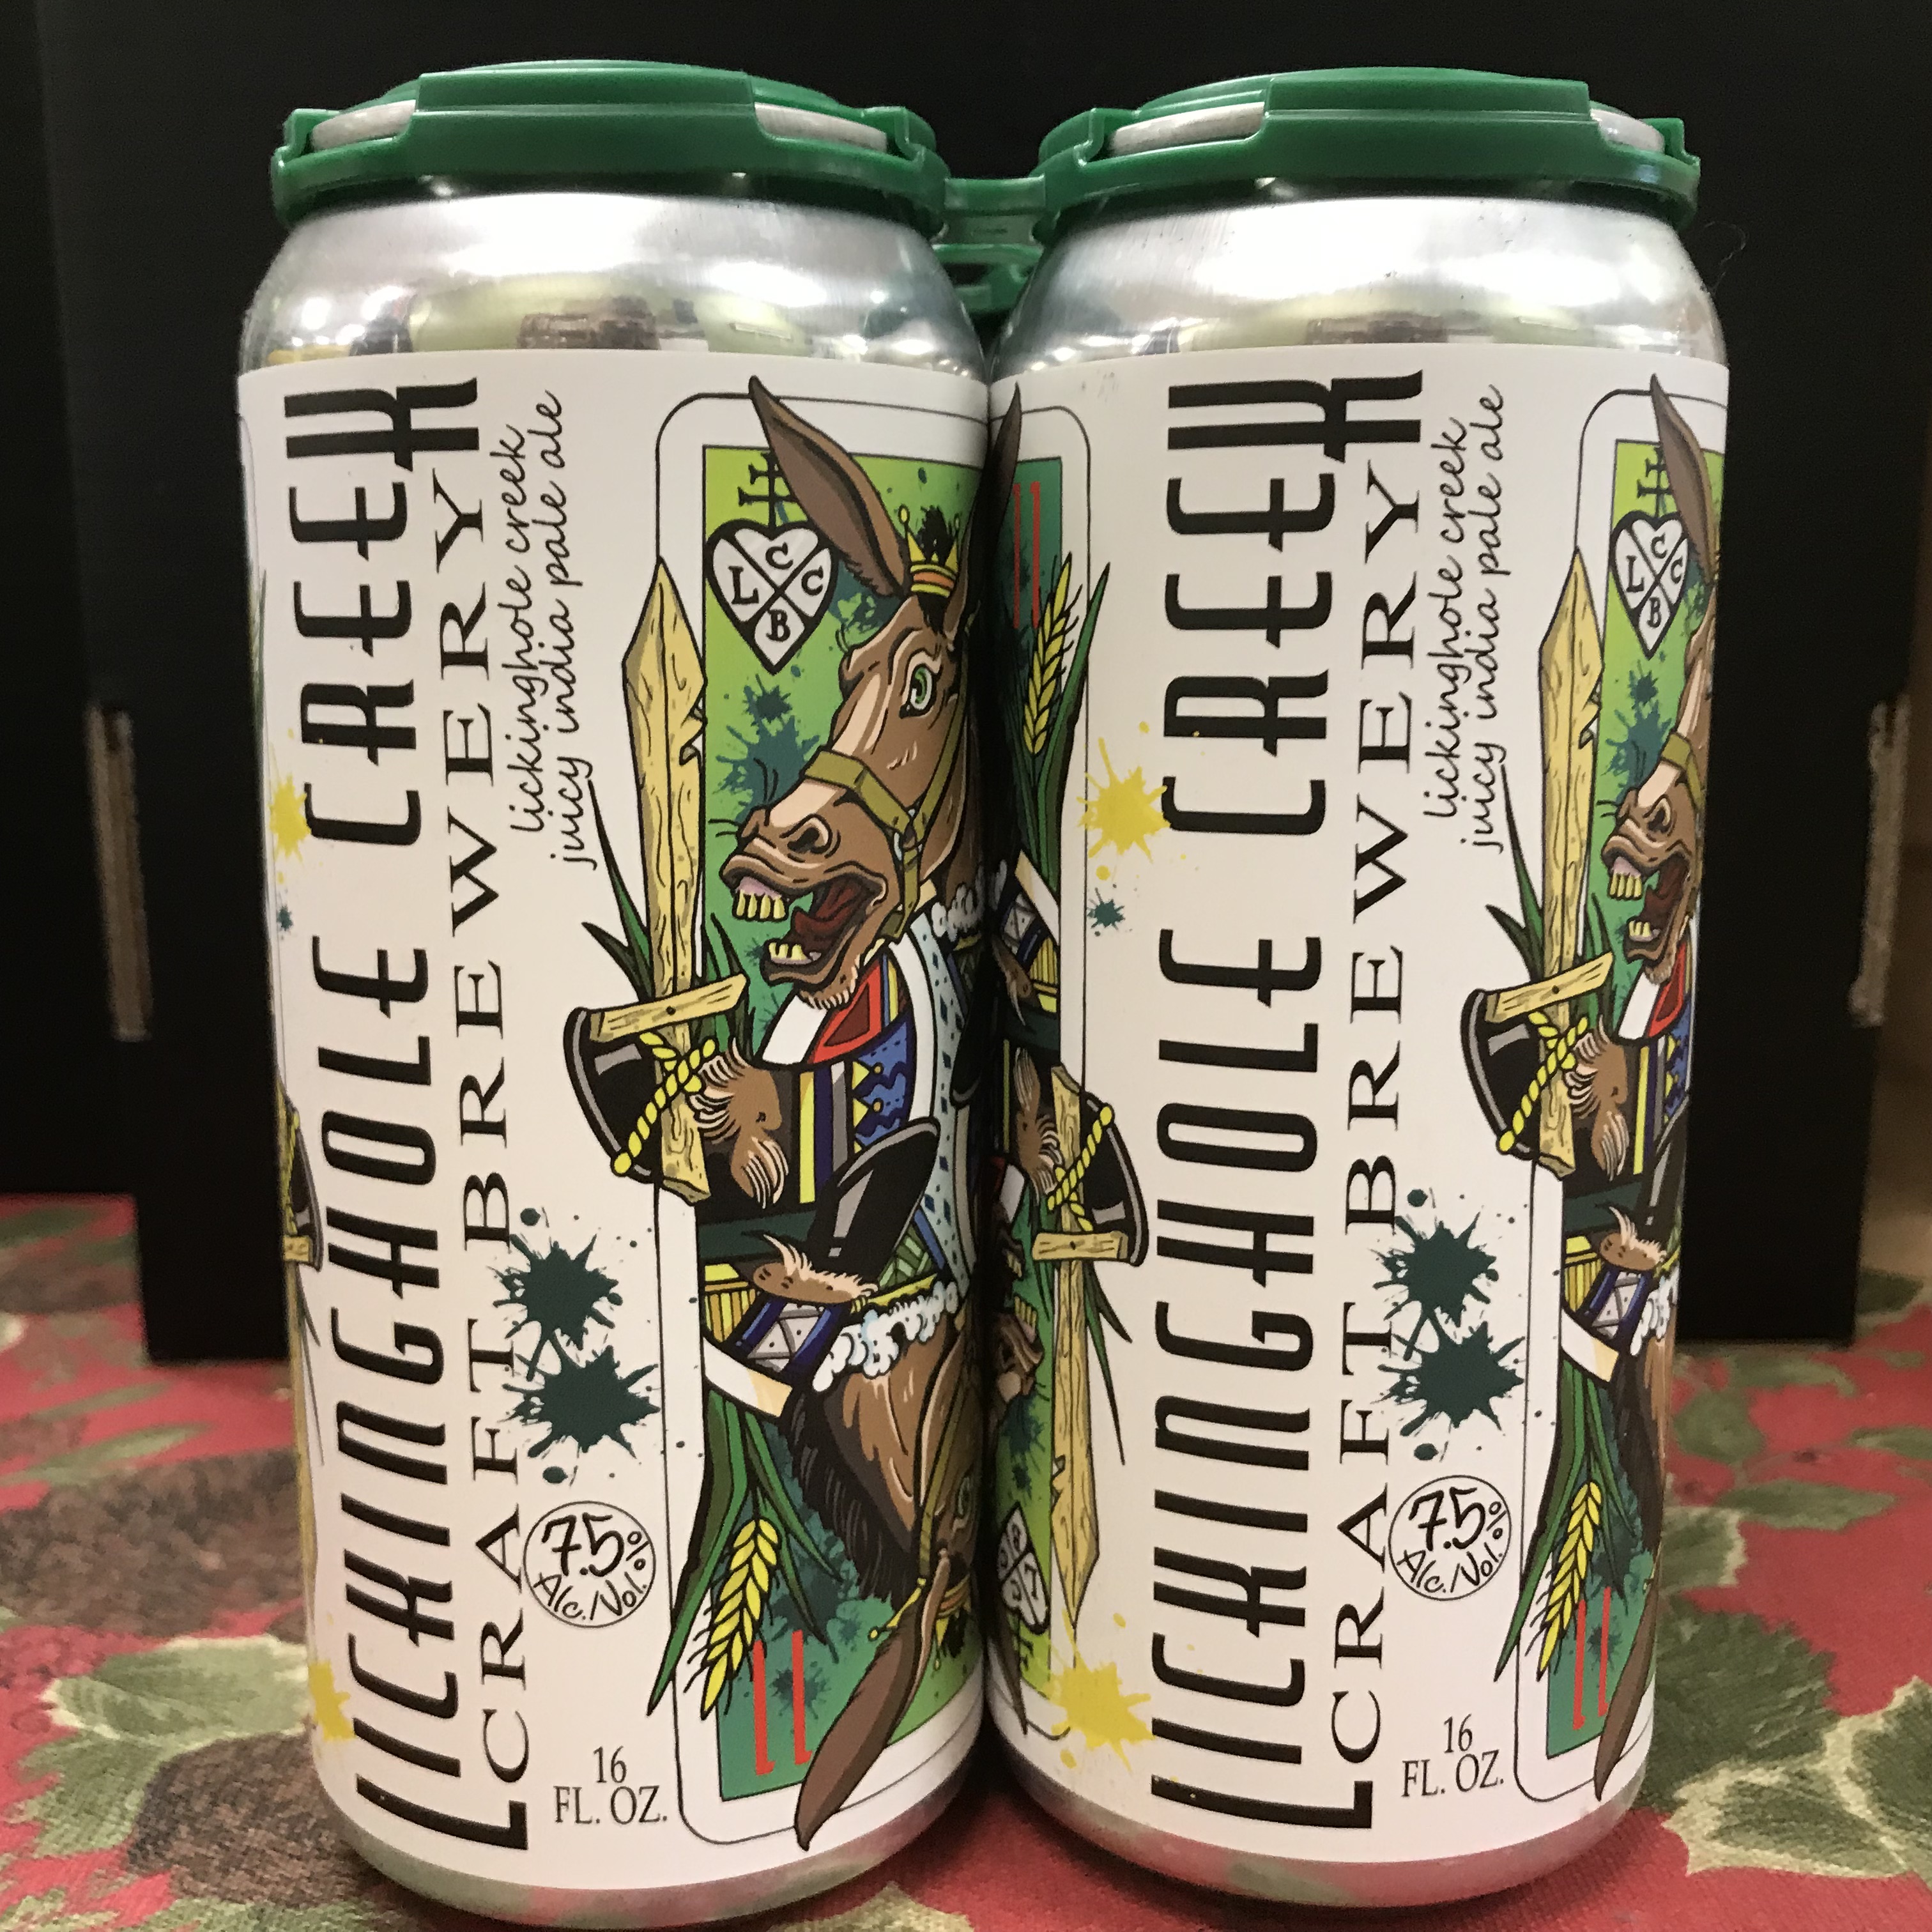 Lickinghole Creek Juicy India Pale Ale 4 x 1 pint cans